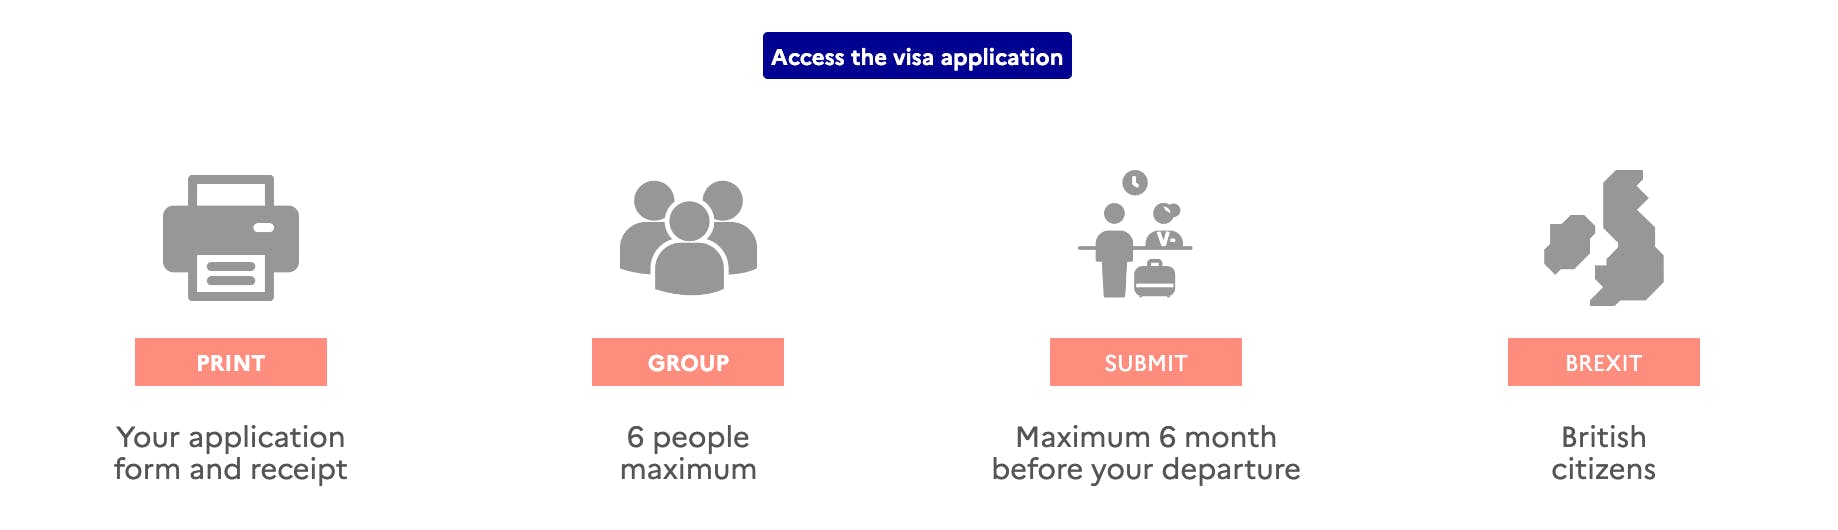 Access the visa application to create or log into an account